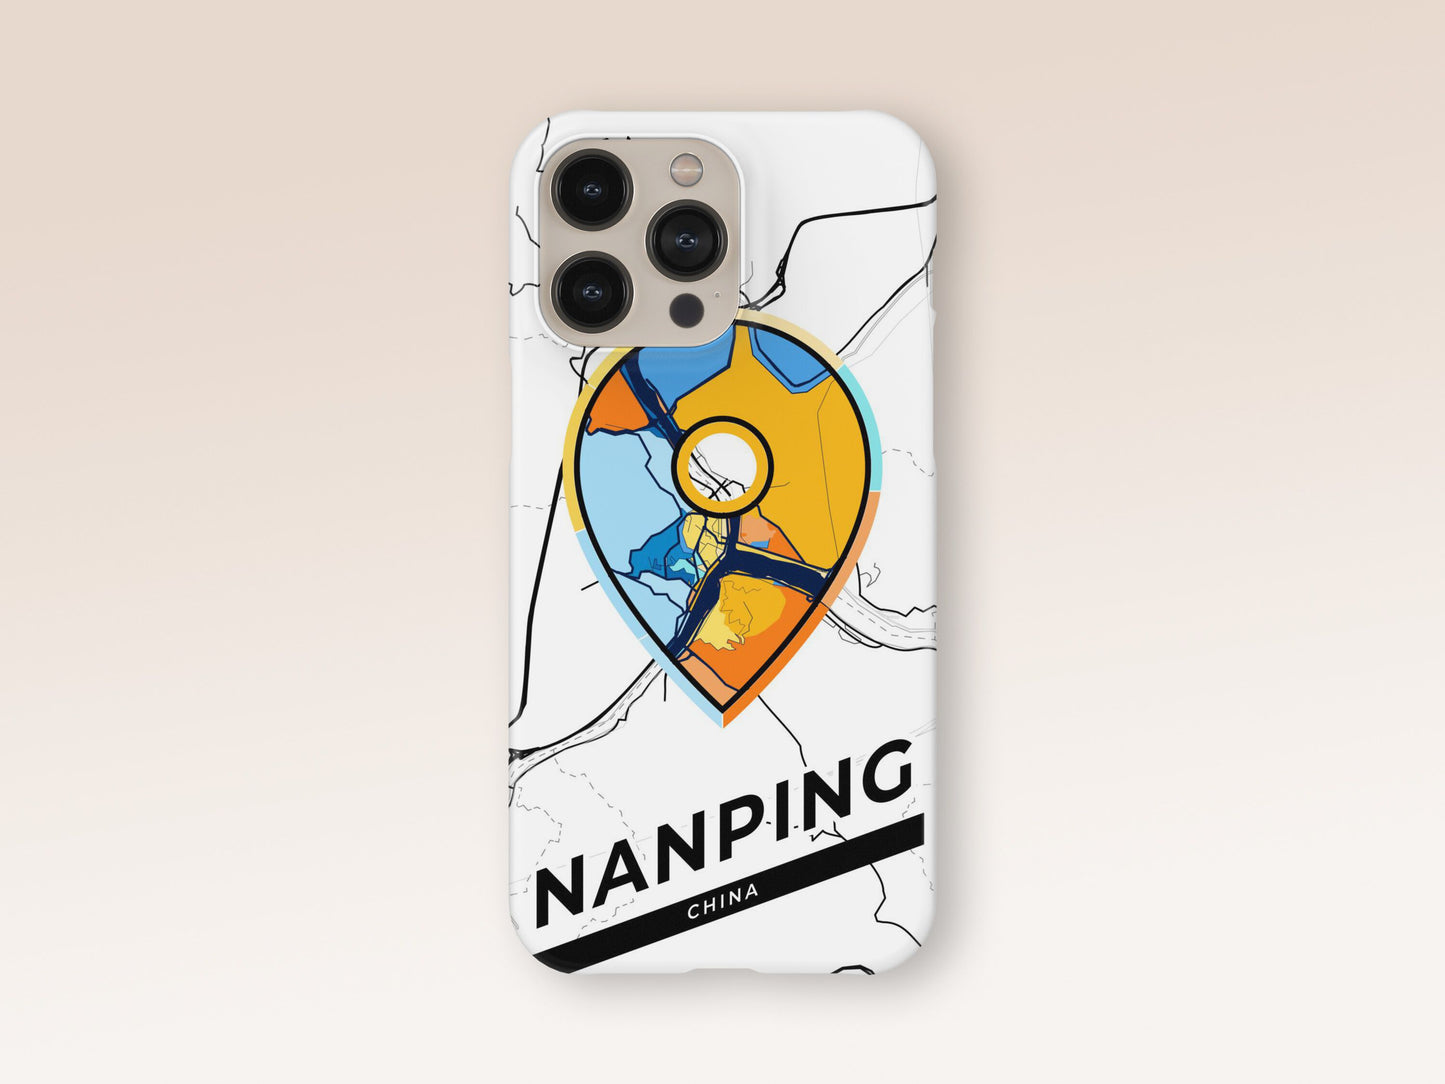 Nanping China slim phone case with colorful icon 1